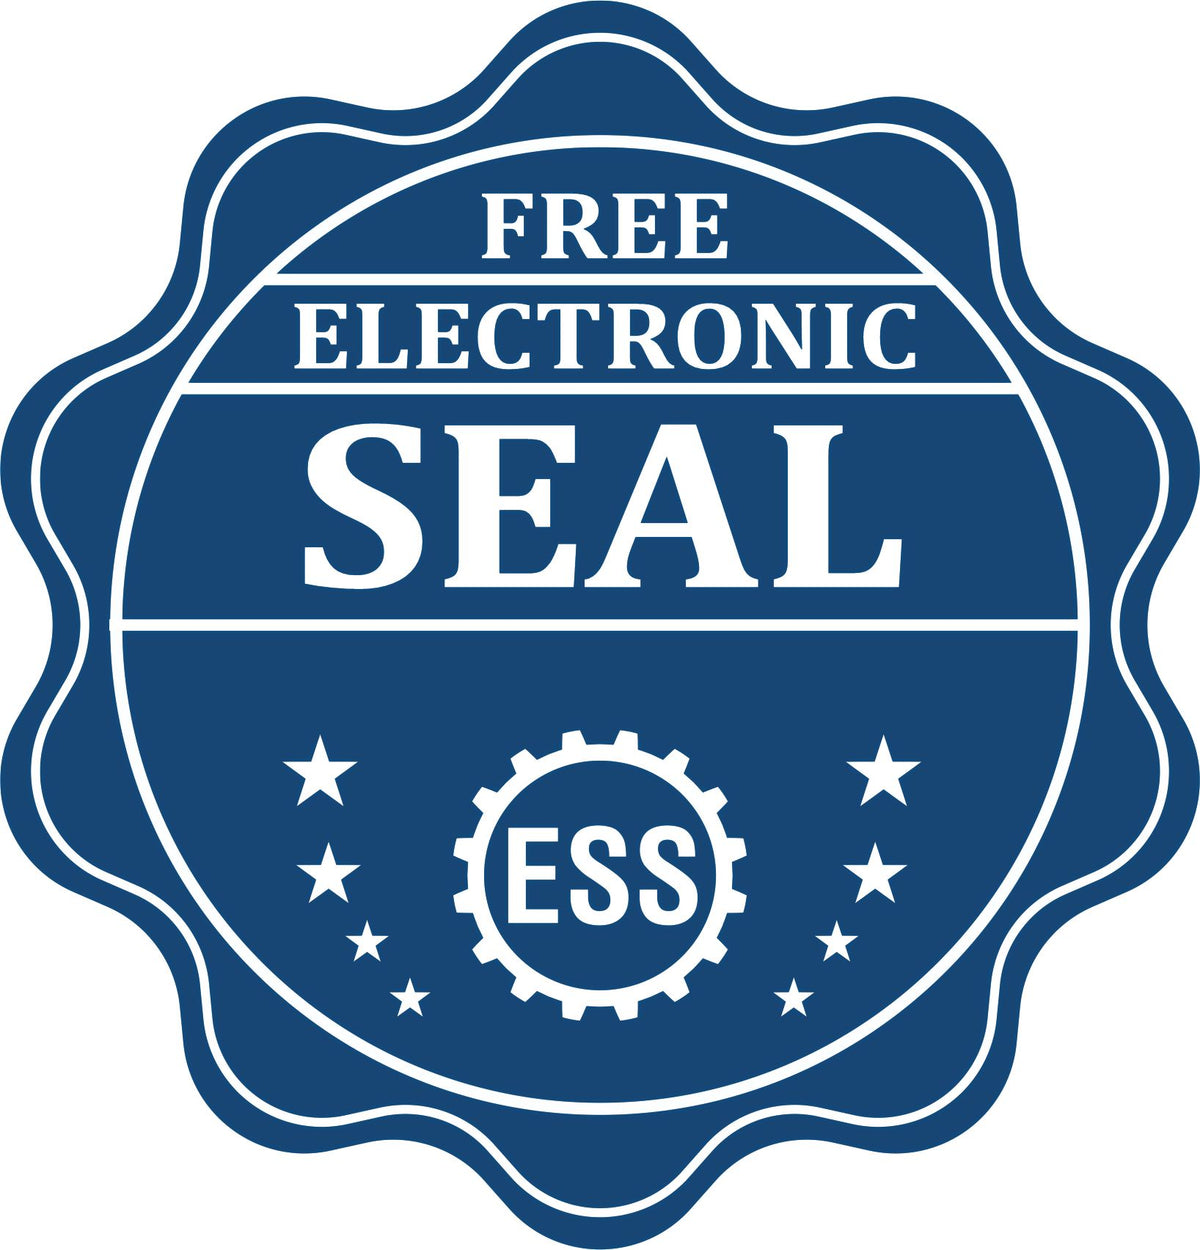 A badge showing a free electronic seal for the District of Columbia Geologist Desk Seal with stars and the ESS gear on the emblem.